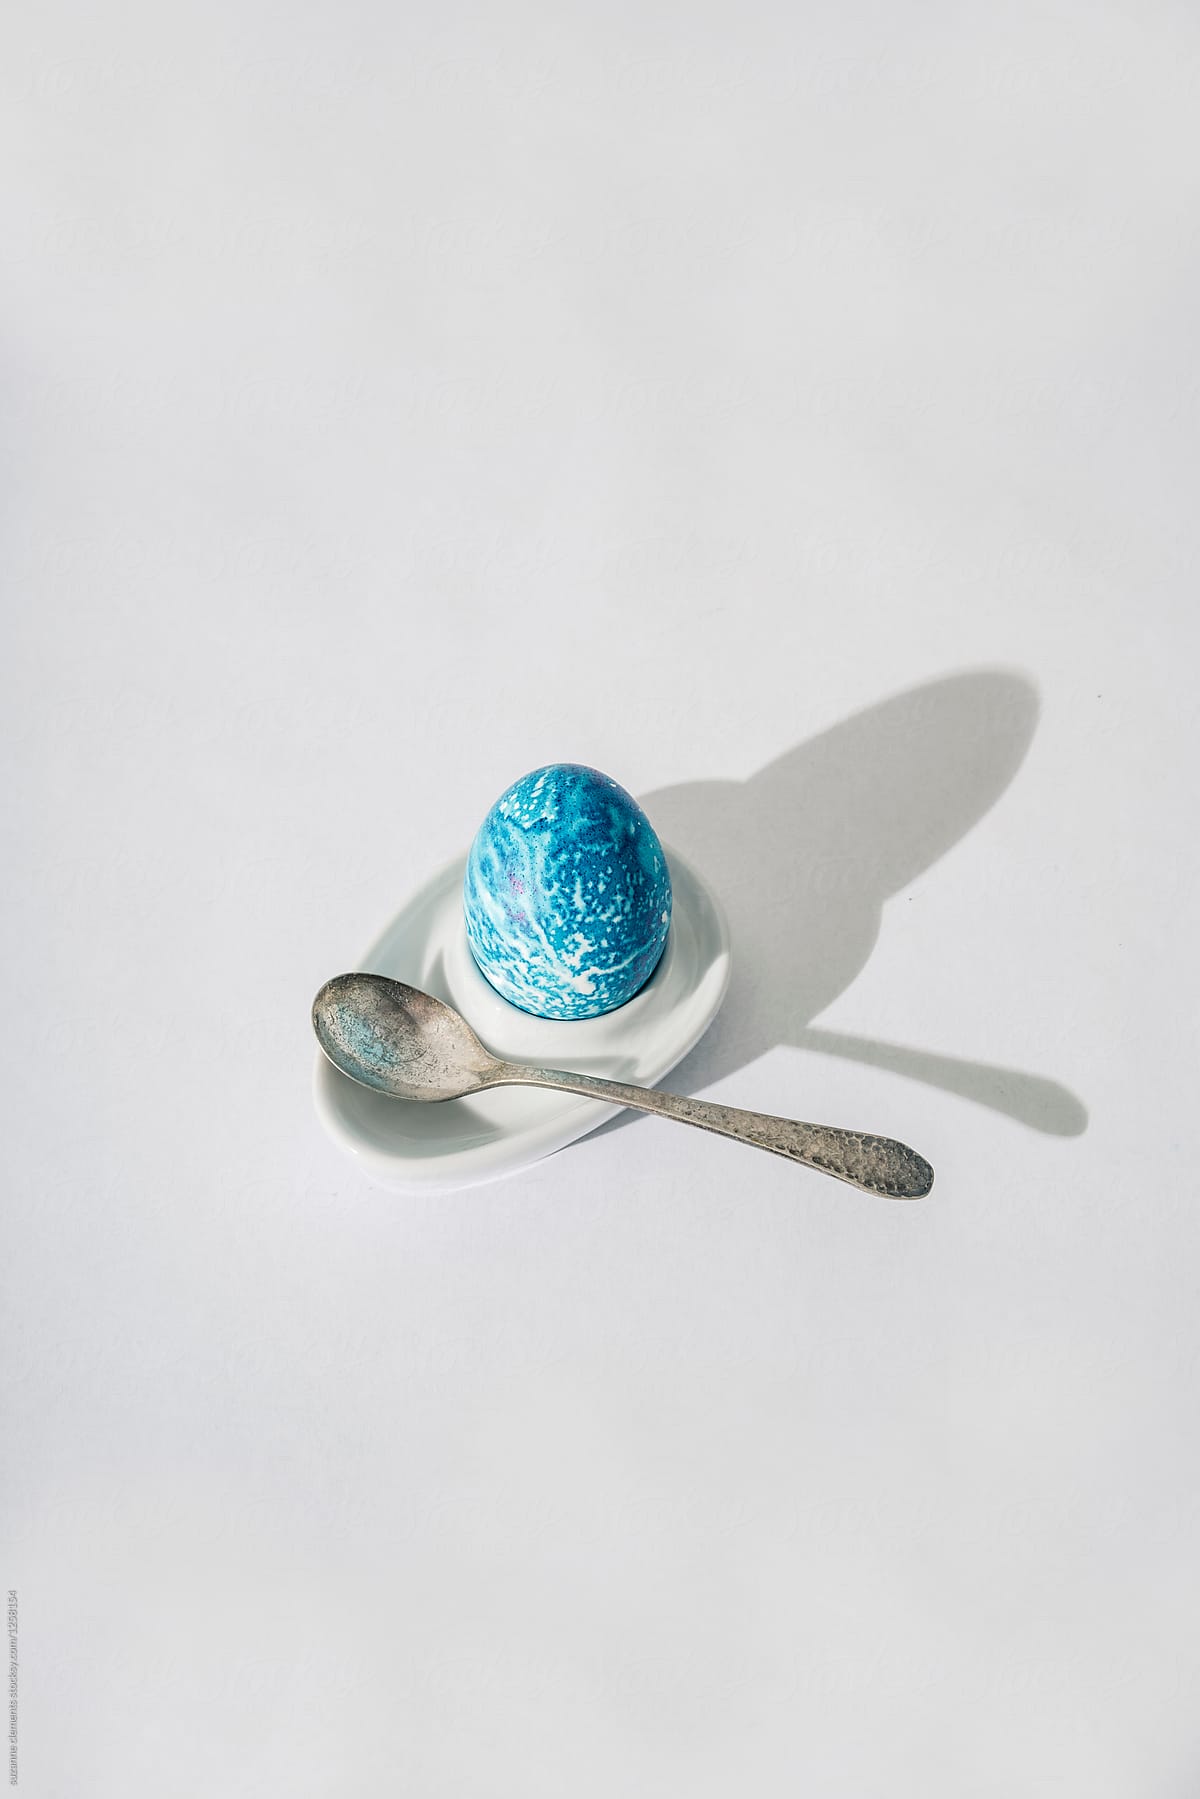 Hand-Painted Abstract Speckled Easter Egg in Egg Cup